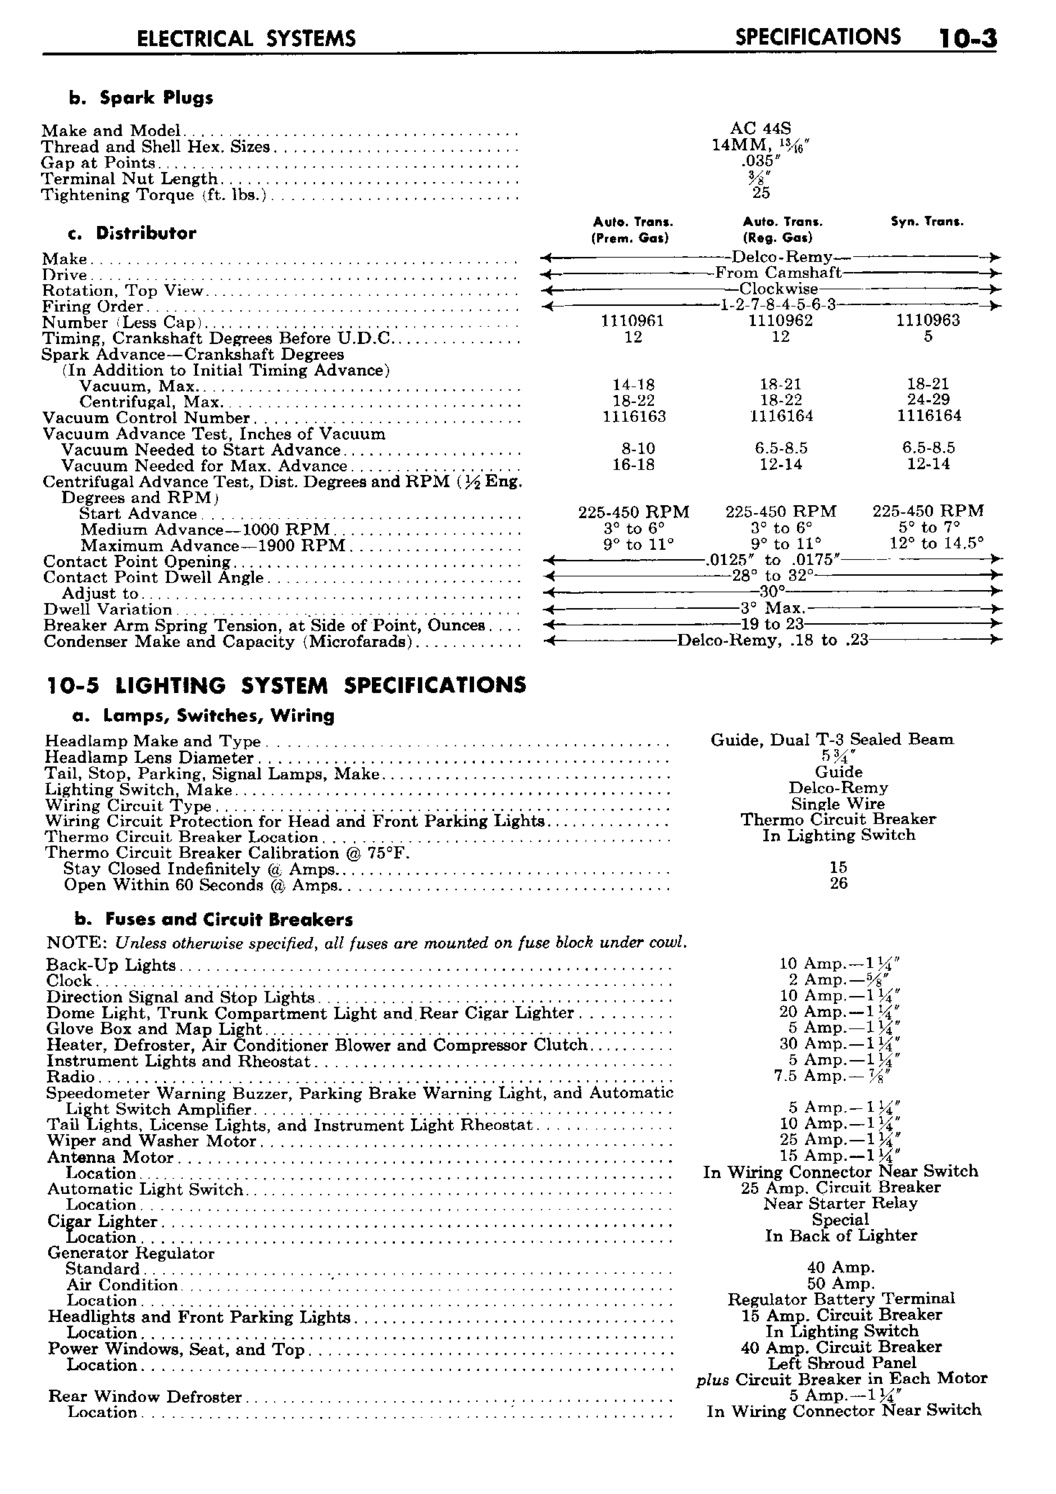 n_11 1960 Buick Shop Manual - Electrical Systems-003-003.jpg